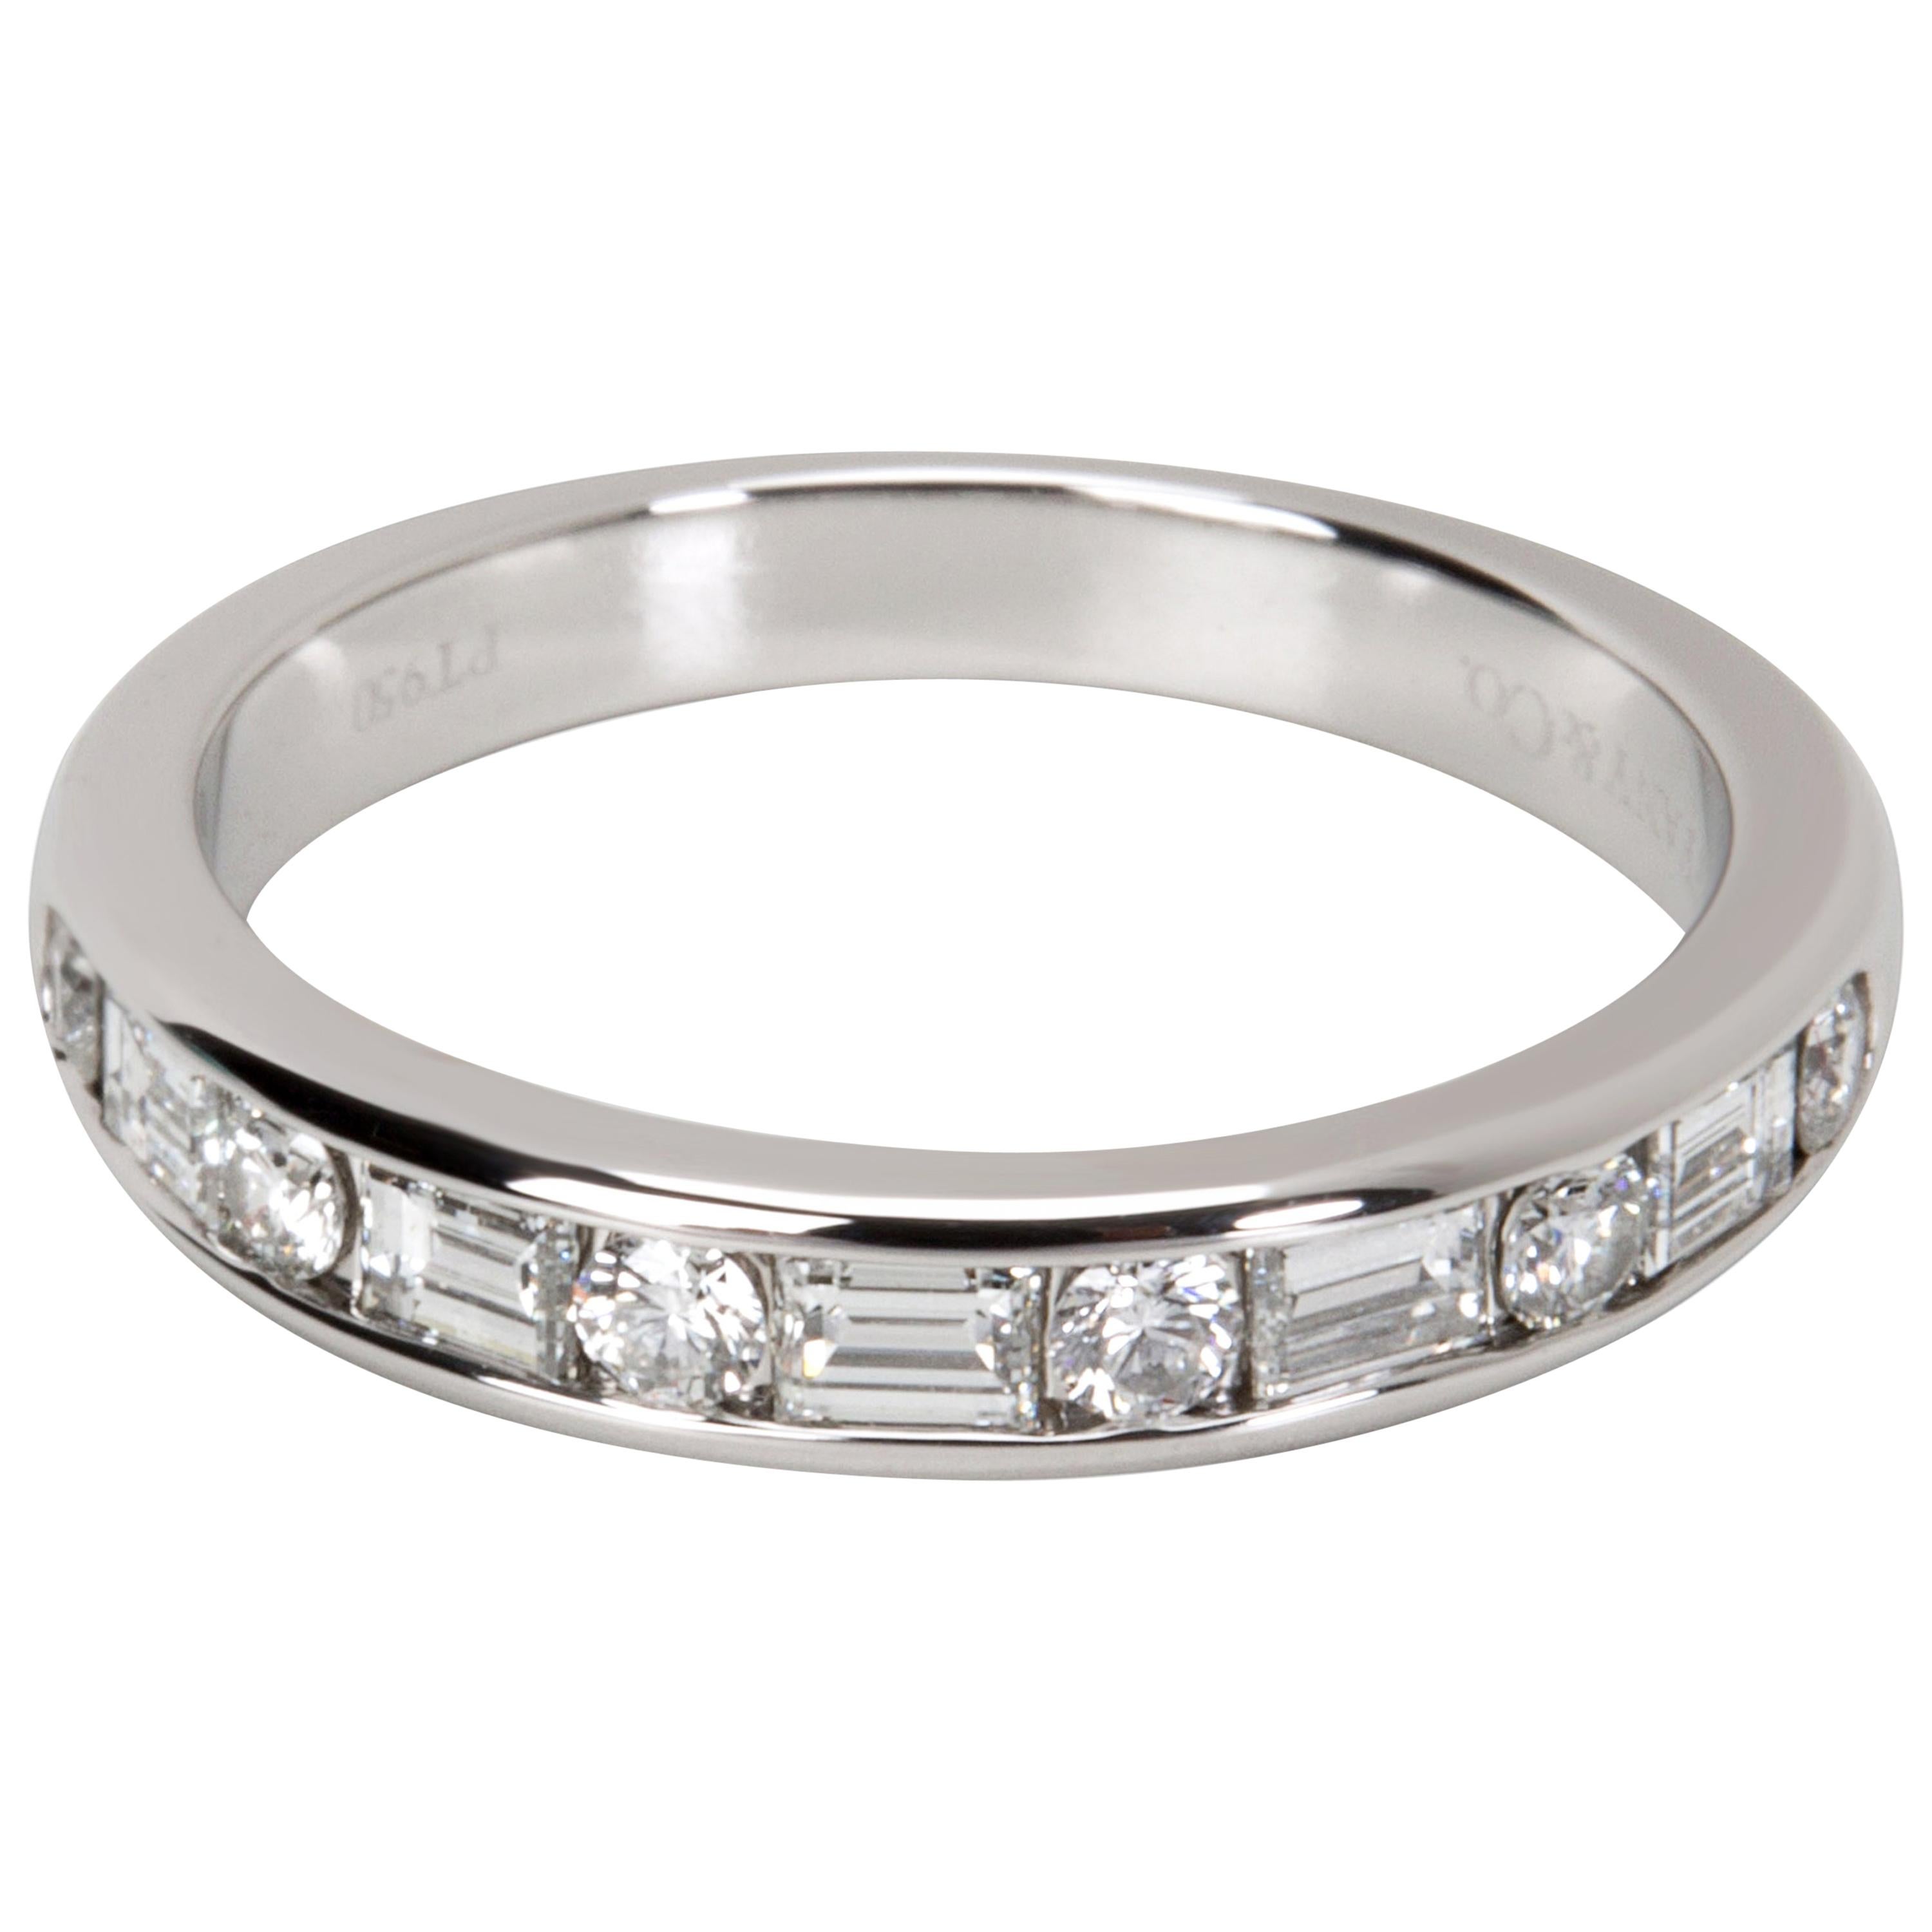 Tiffany & Co. Round and Baguette Diamond Band in Platinum 0.66 Carat